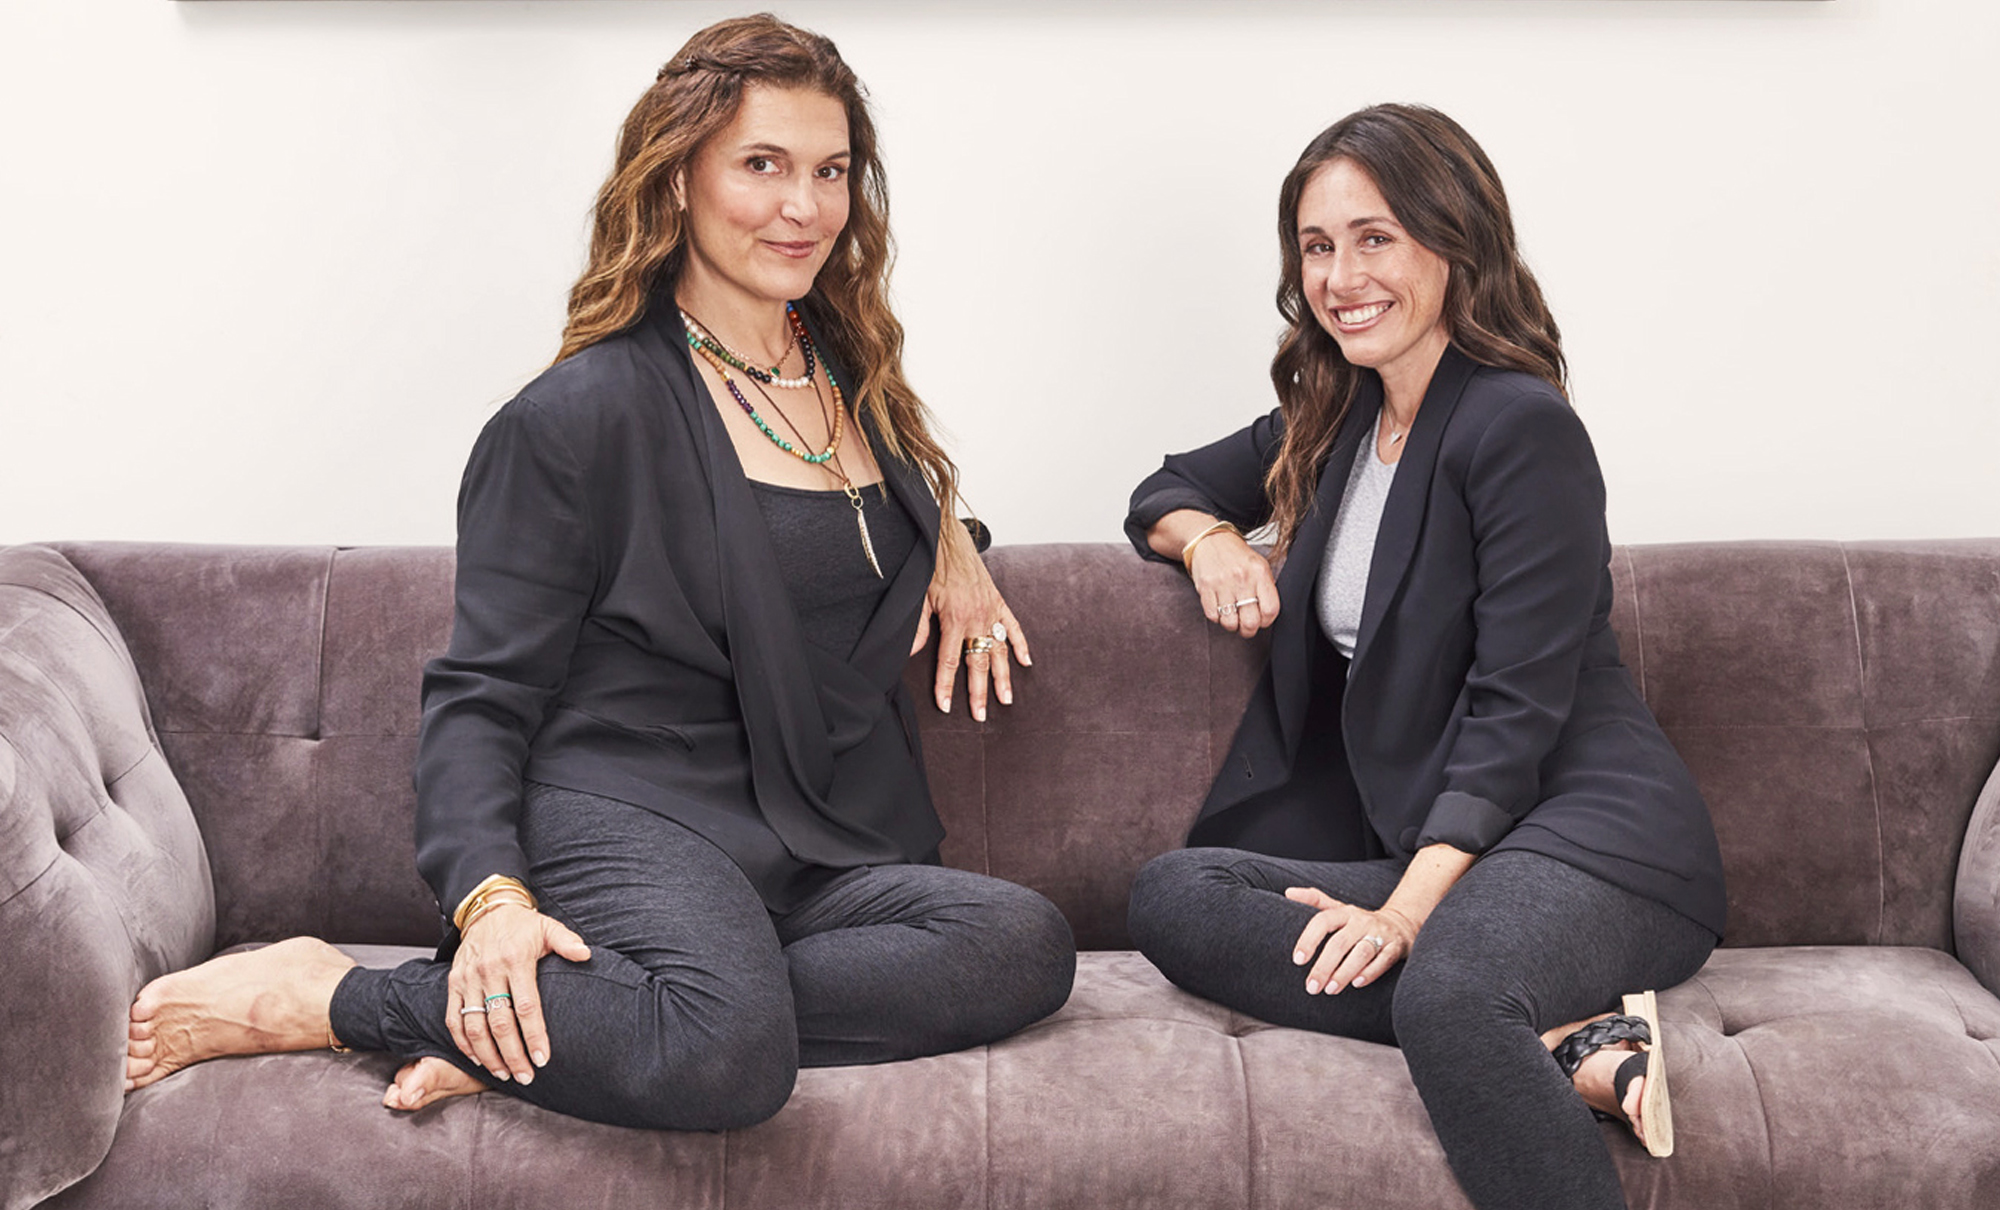 Beyond Yoga moves into physical retail